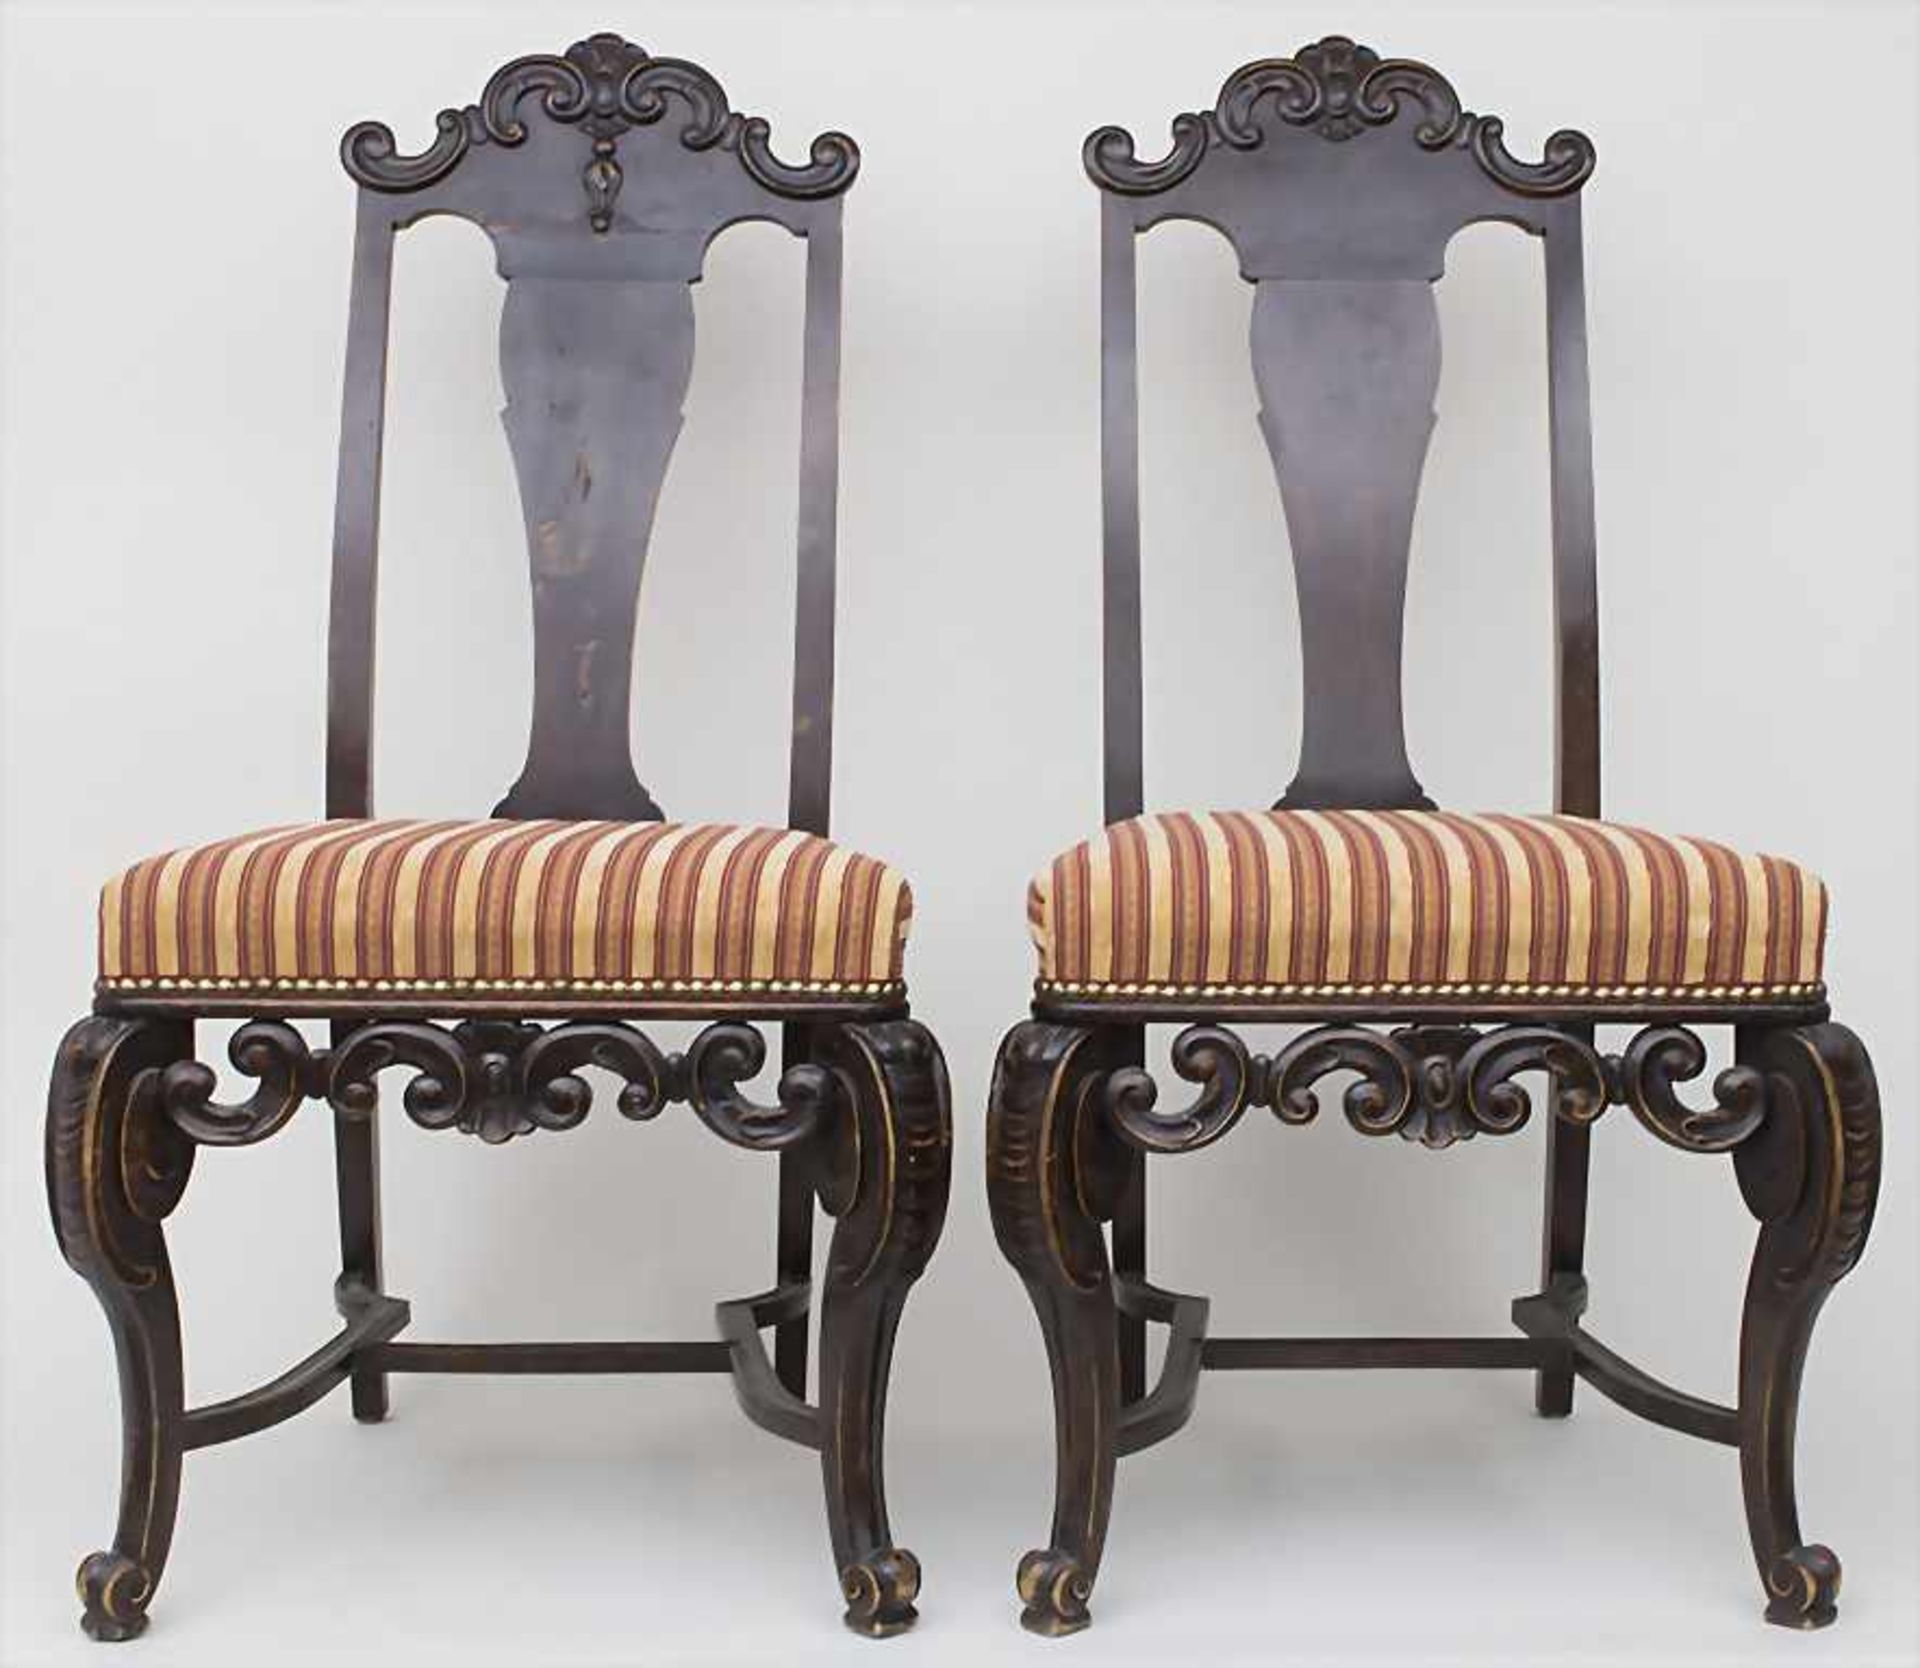 Paar Historismus-Stühle / A pair of historism chairs, 19. Jh.Material: Holz, dunkel gebeizt,